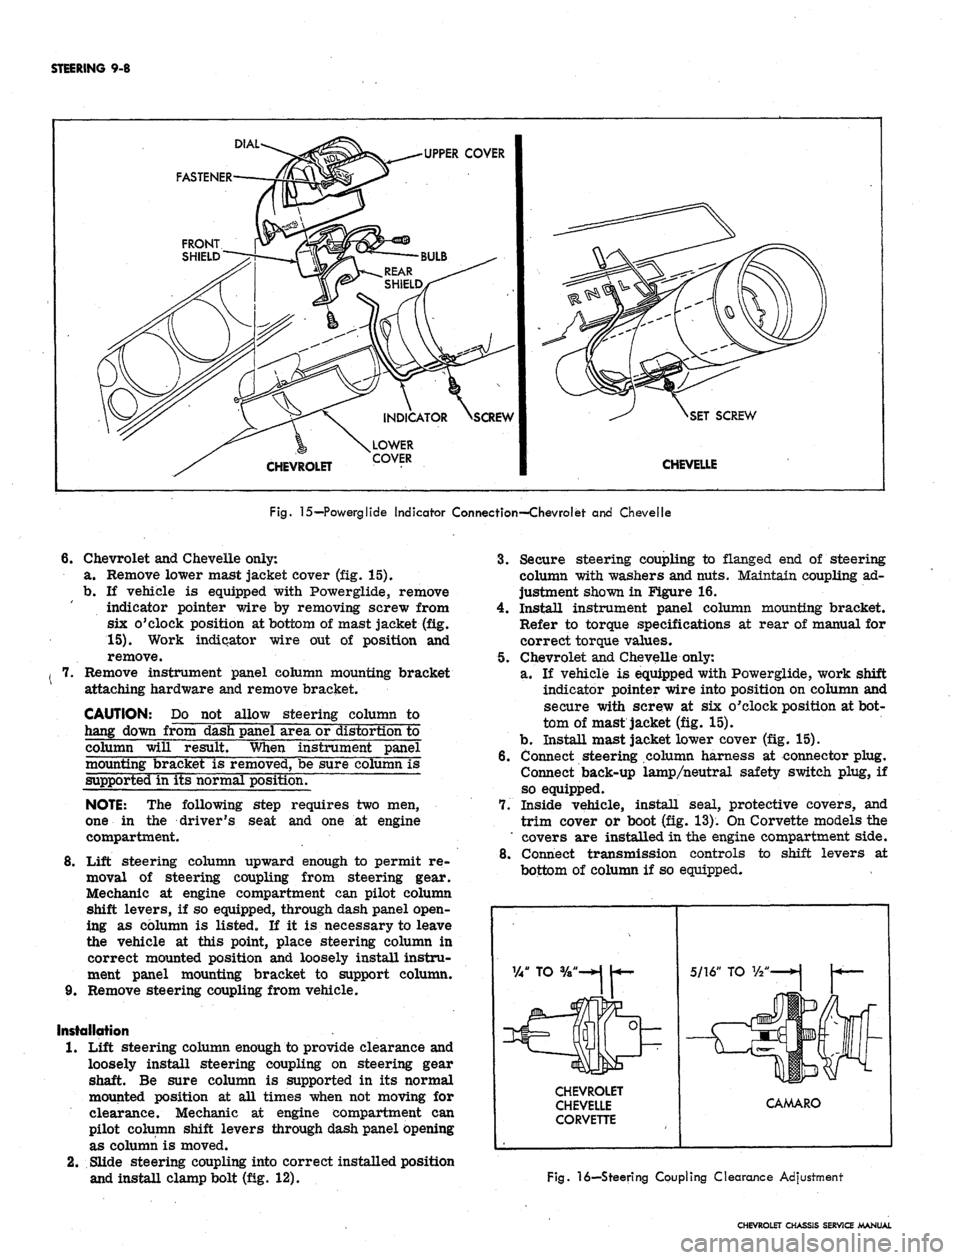 CHEVROLET CAMARO 1967 1.G Chassis Workshop Manual 
STEERING 9-8

DIAL

UPPER COVER

FASTENER

CHEVROLET 
SCREW

CHEVELLE

Fig.
 15—Powerglide Indicator Connection—Chevrolet and Chevelle

6. 
Chevrolet and Chevelle only:

a. Remove lower mast jack